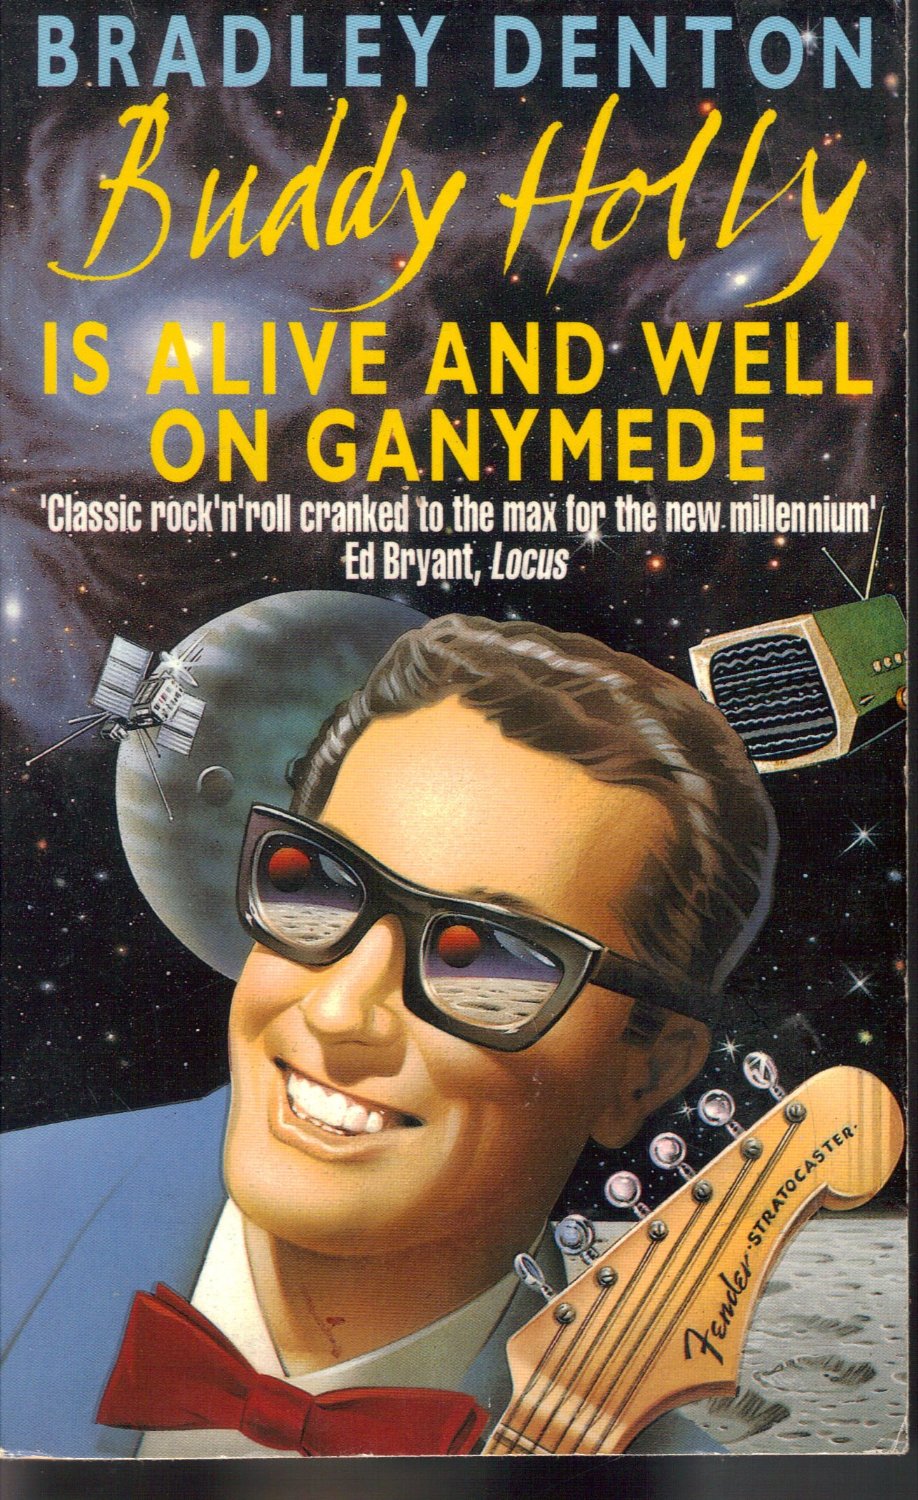 http://cdn8.openculture.com/wp-content/uploads/2014/10/fre-buddy-holly-is-alive-and-well.jpg